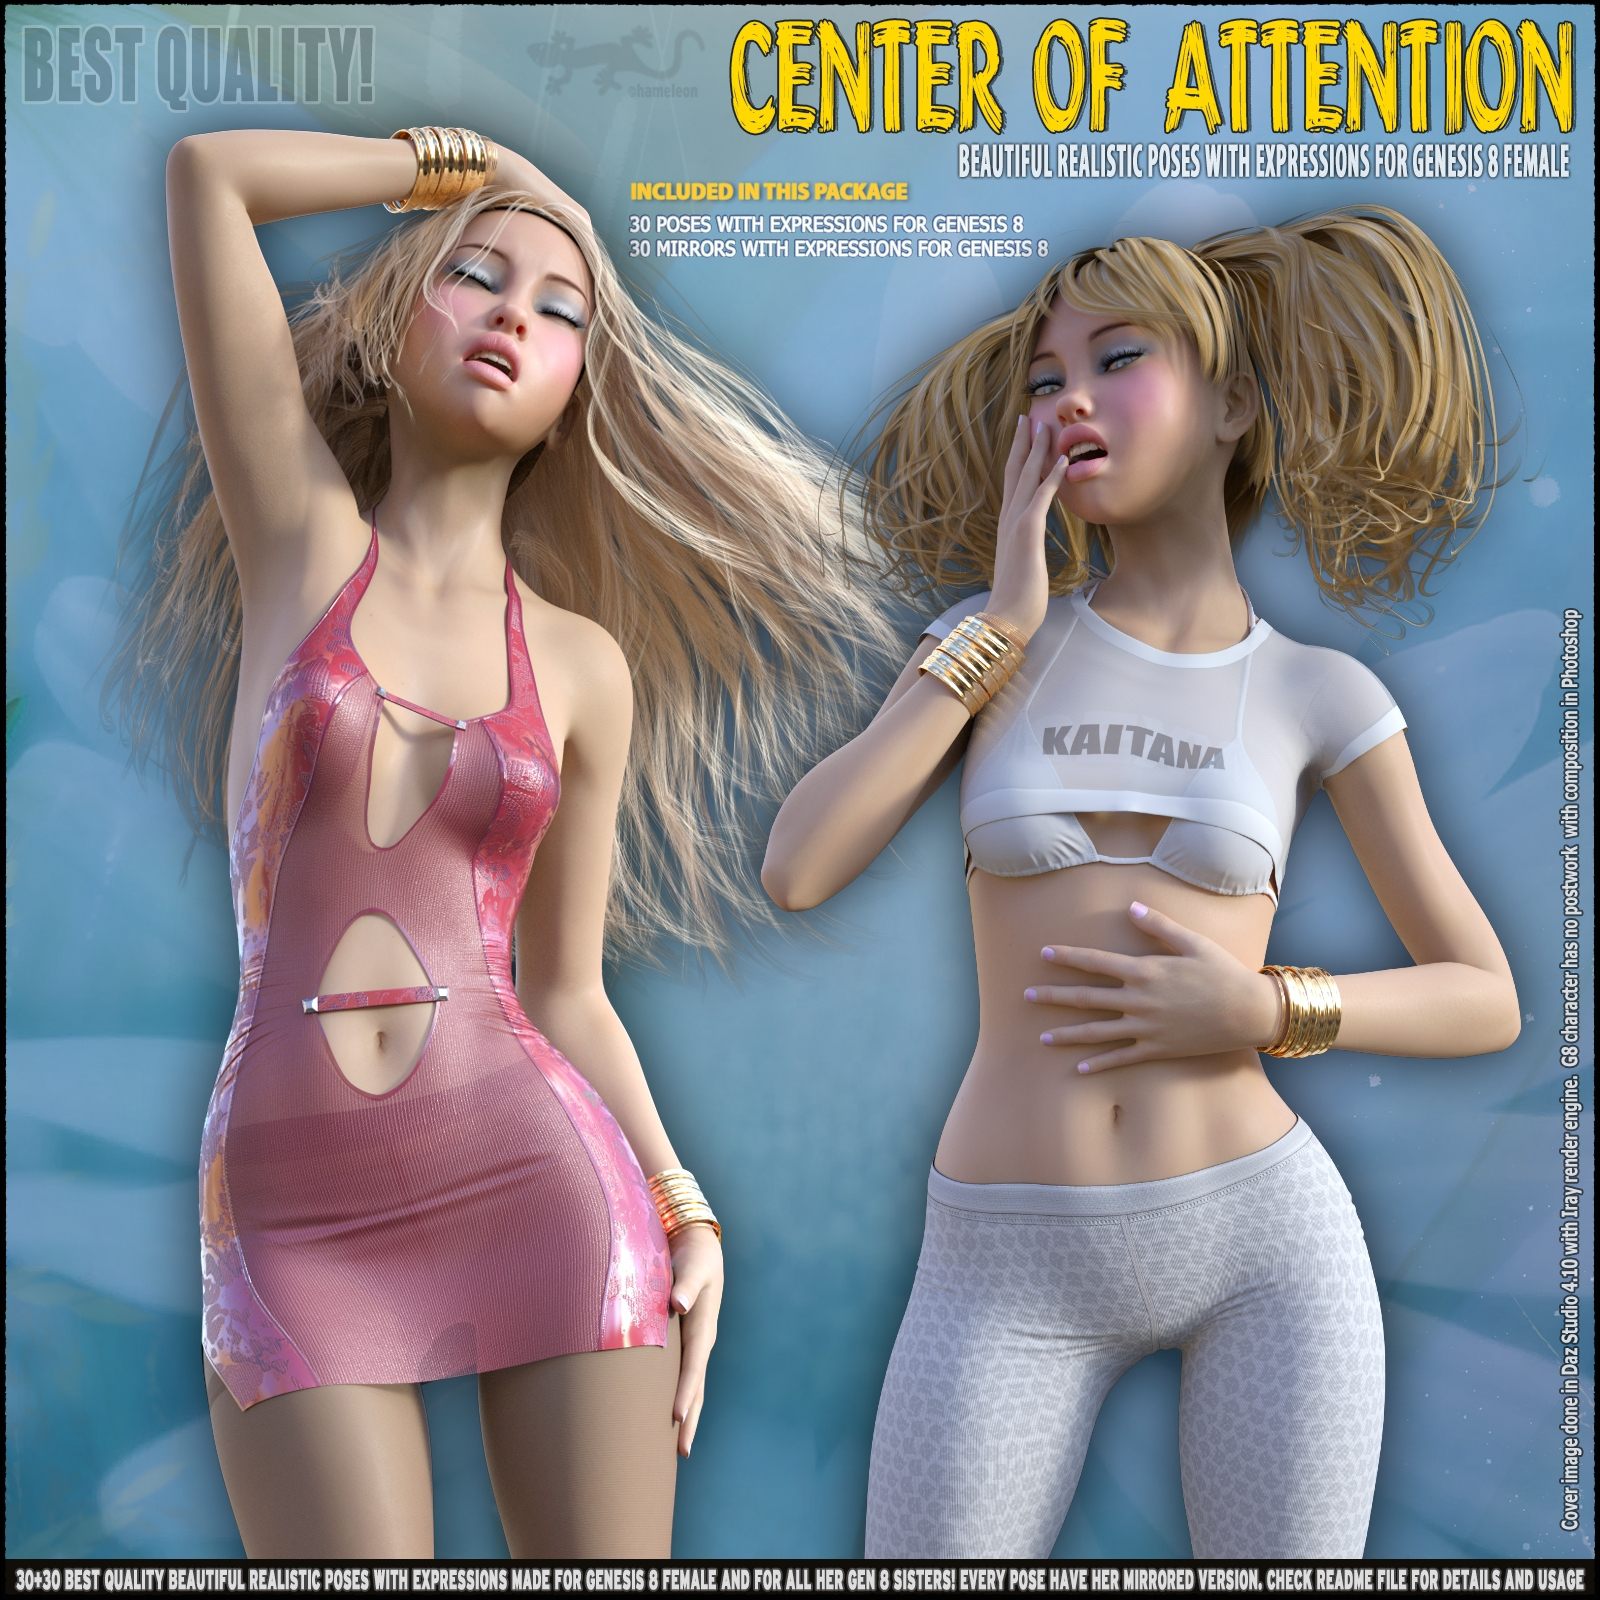 Center Of Attention – Poses for Genesis 8_DAZ3D下载站